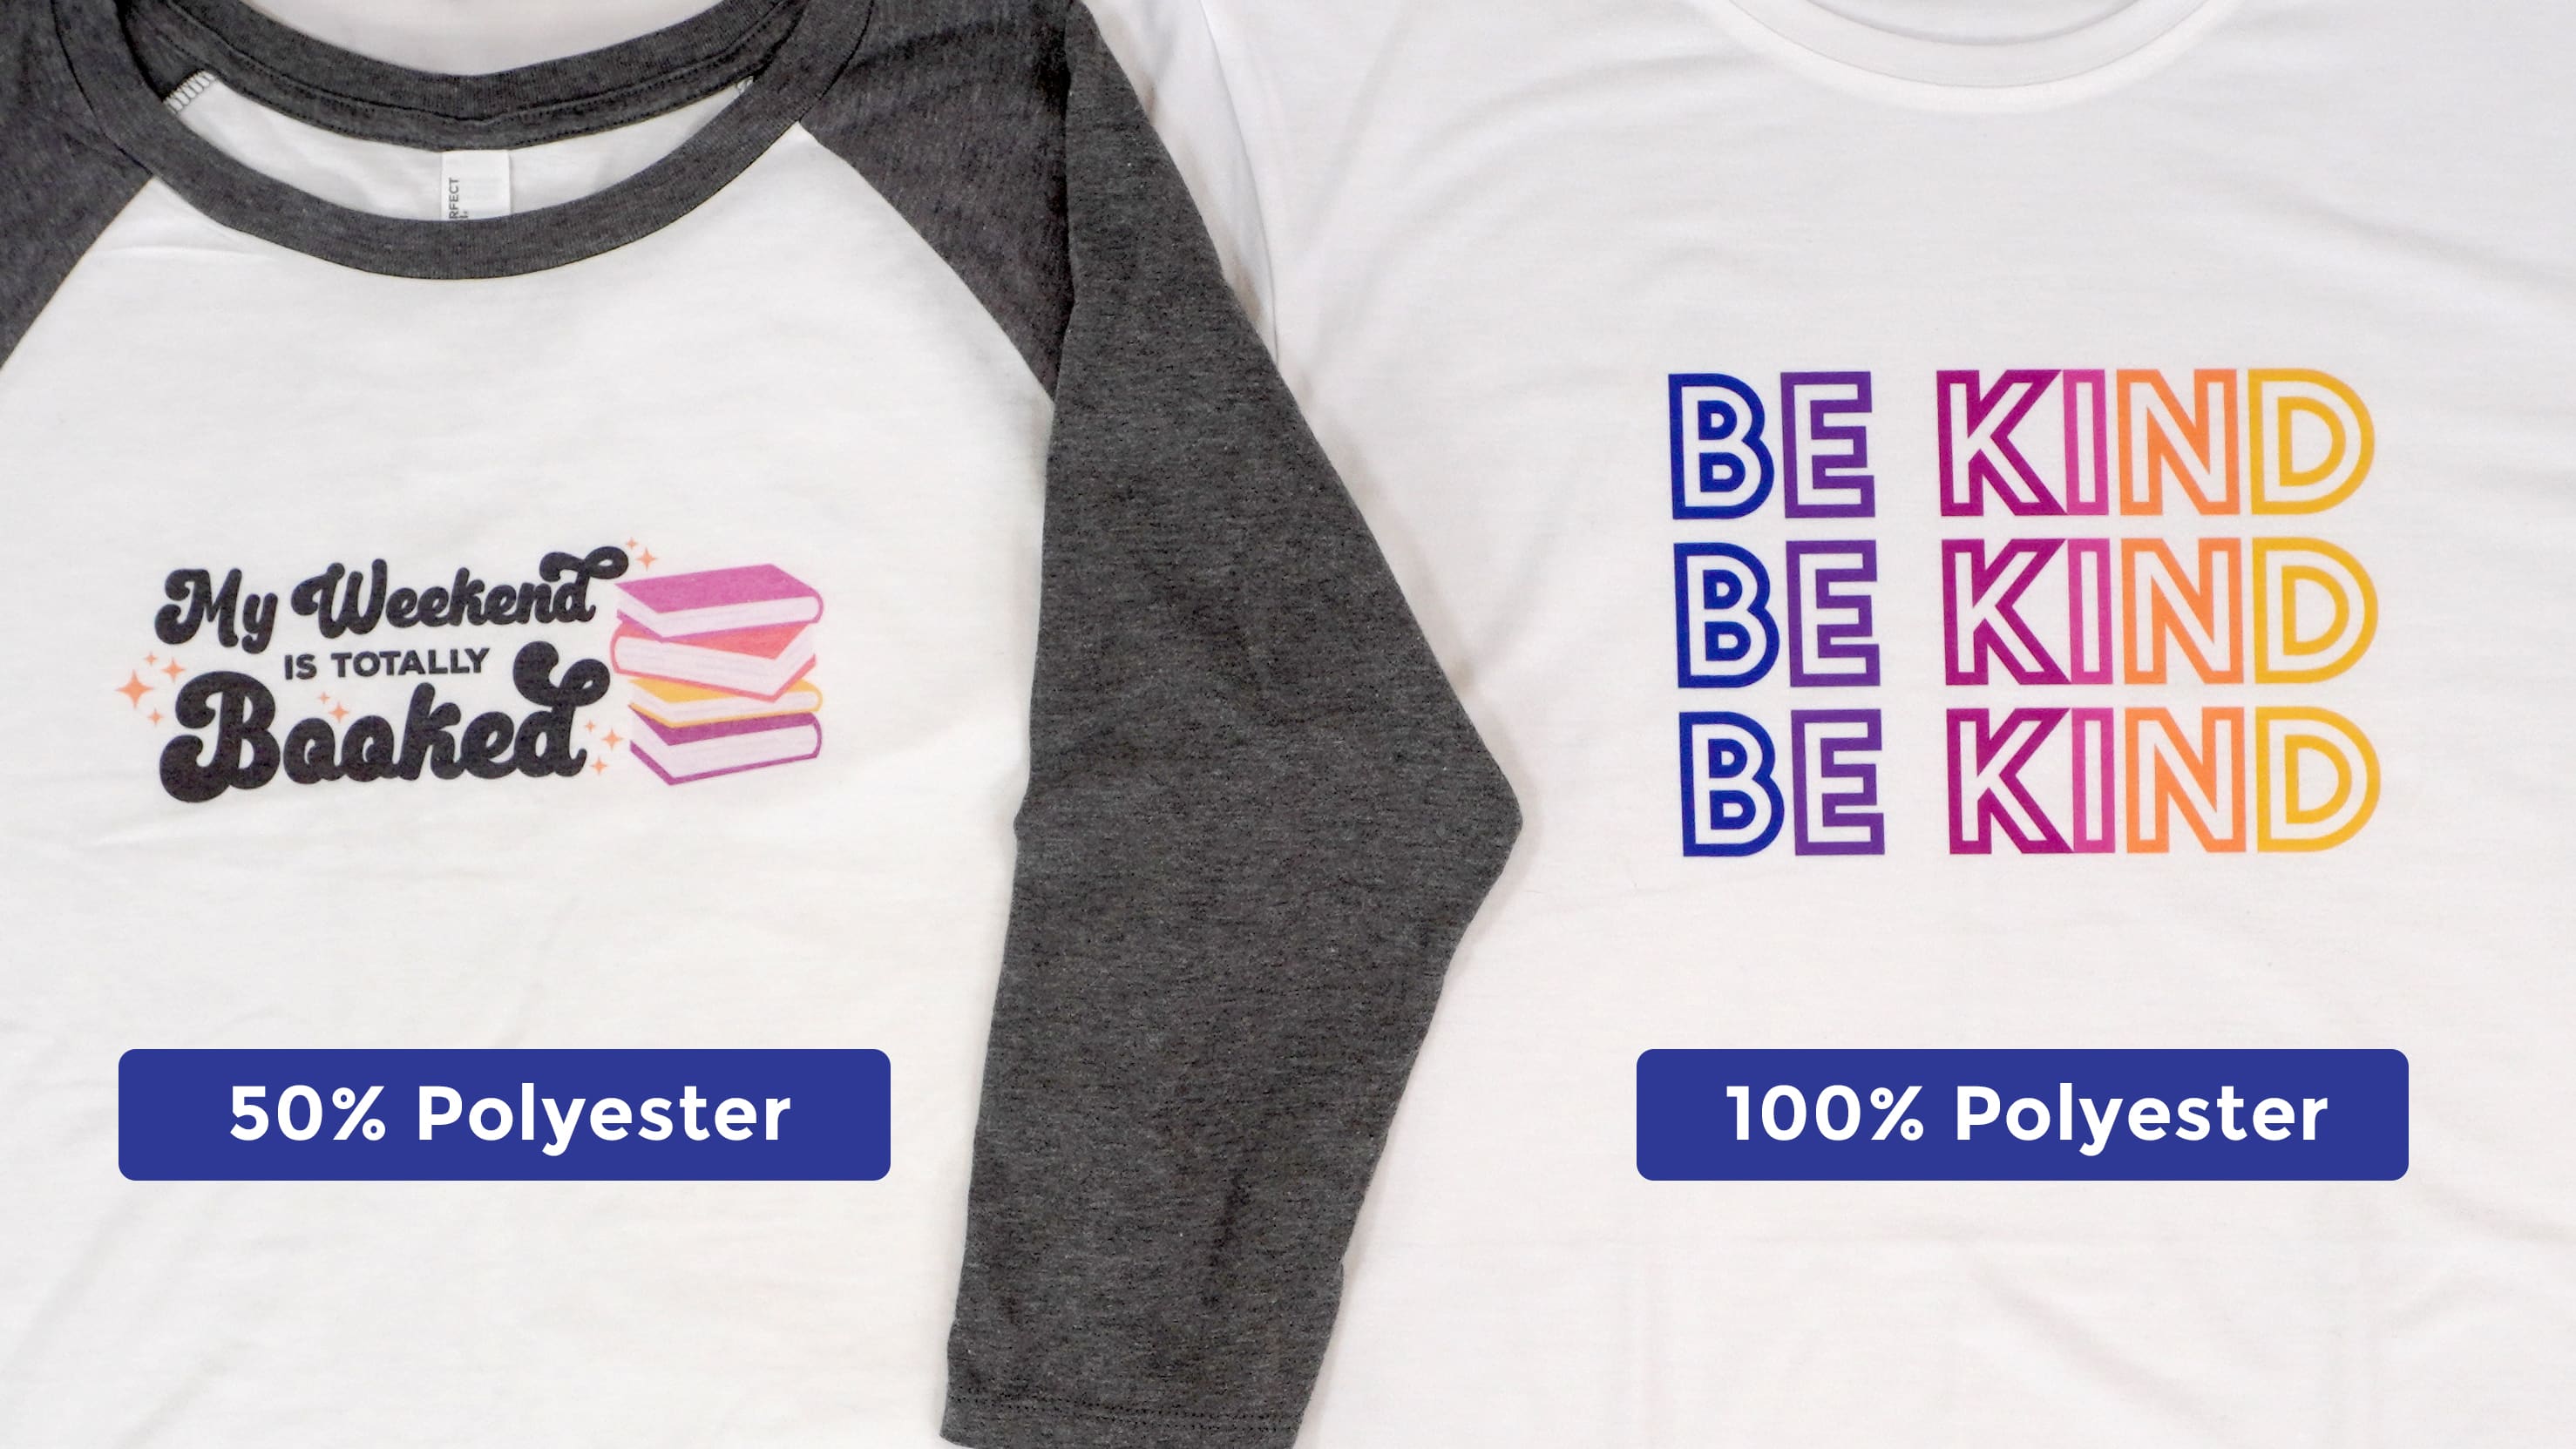 Two colorful printed shirts, one grey-white raglan and one white, side by side with labels "50% polyester" and "100% polyester"